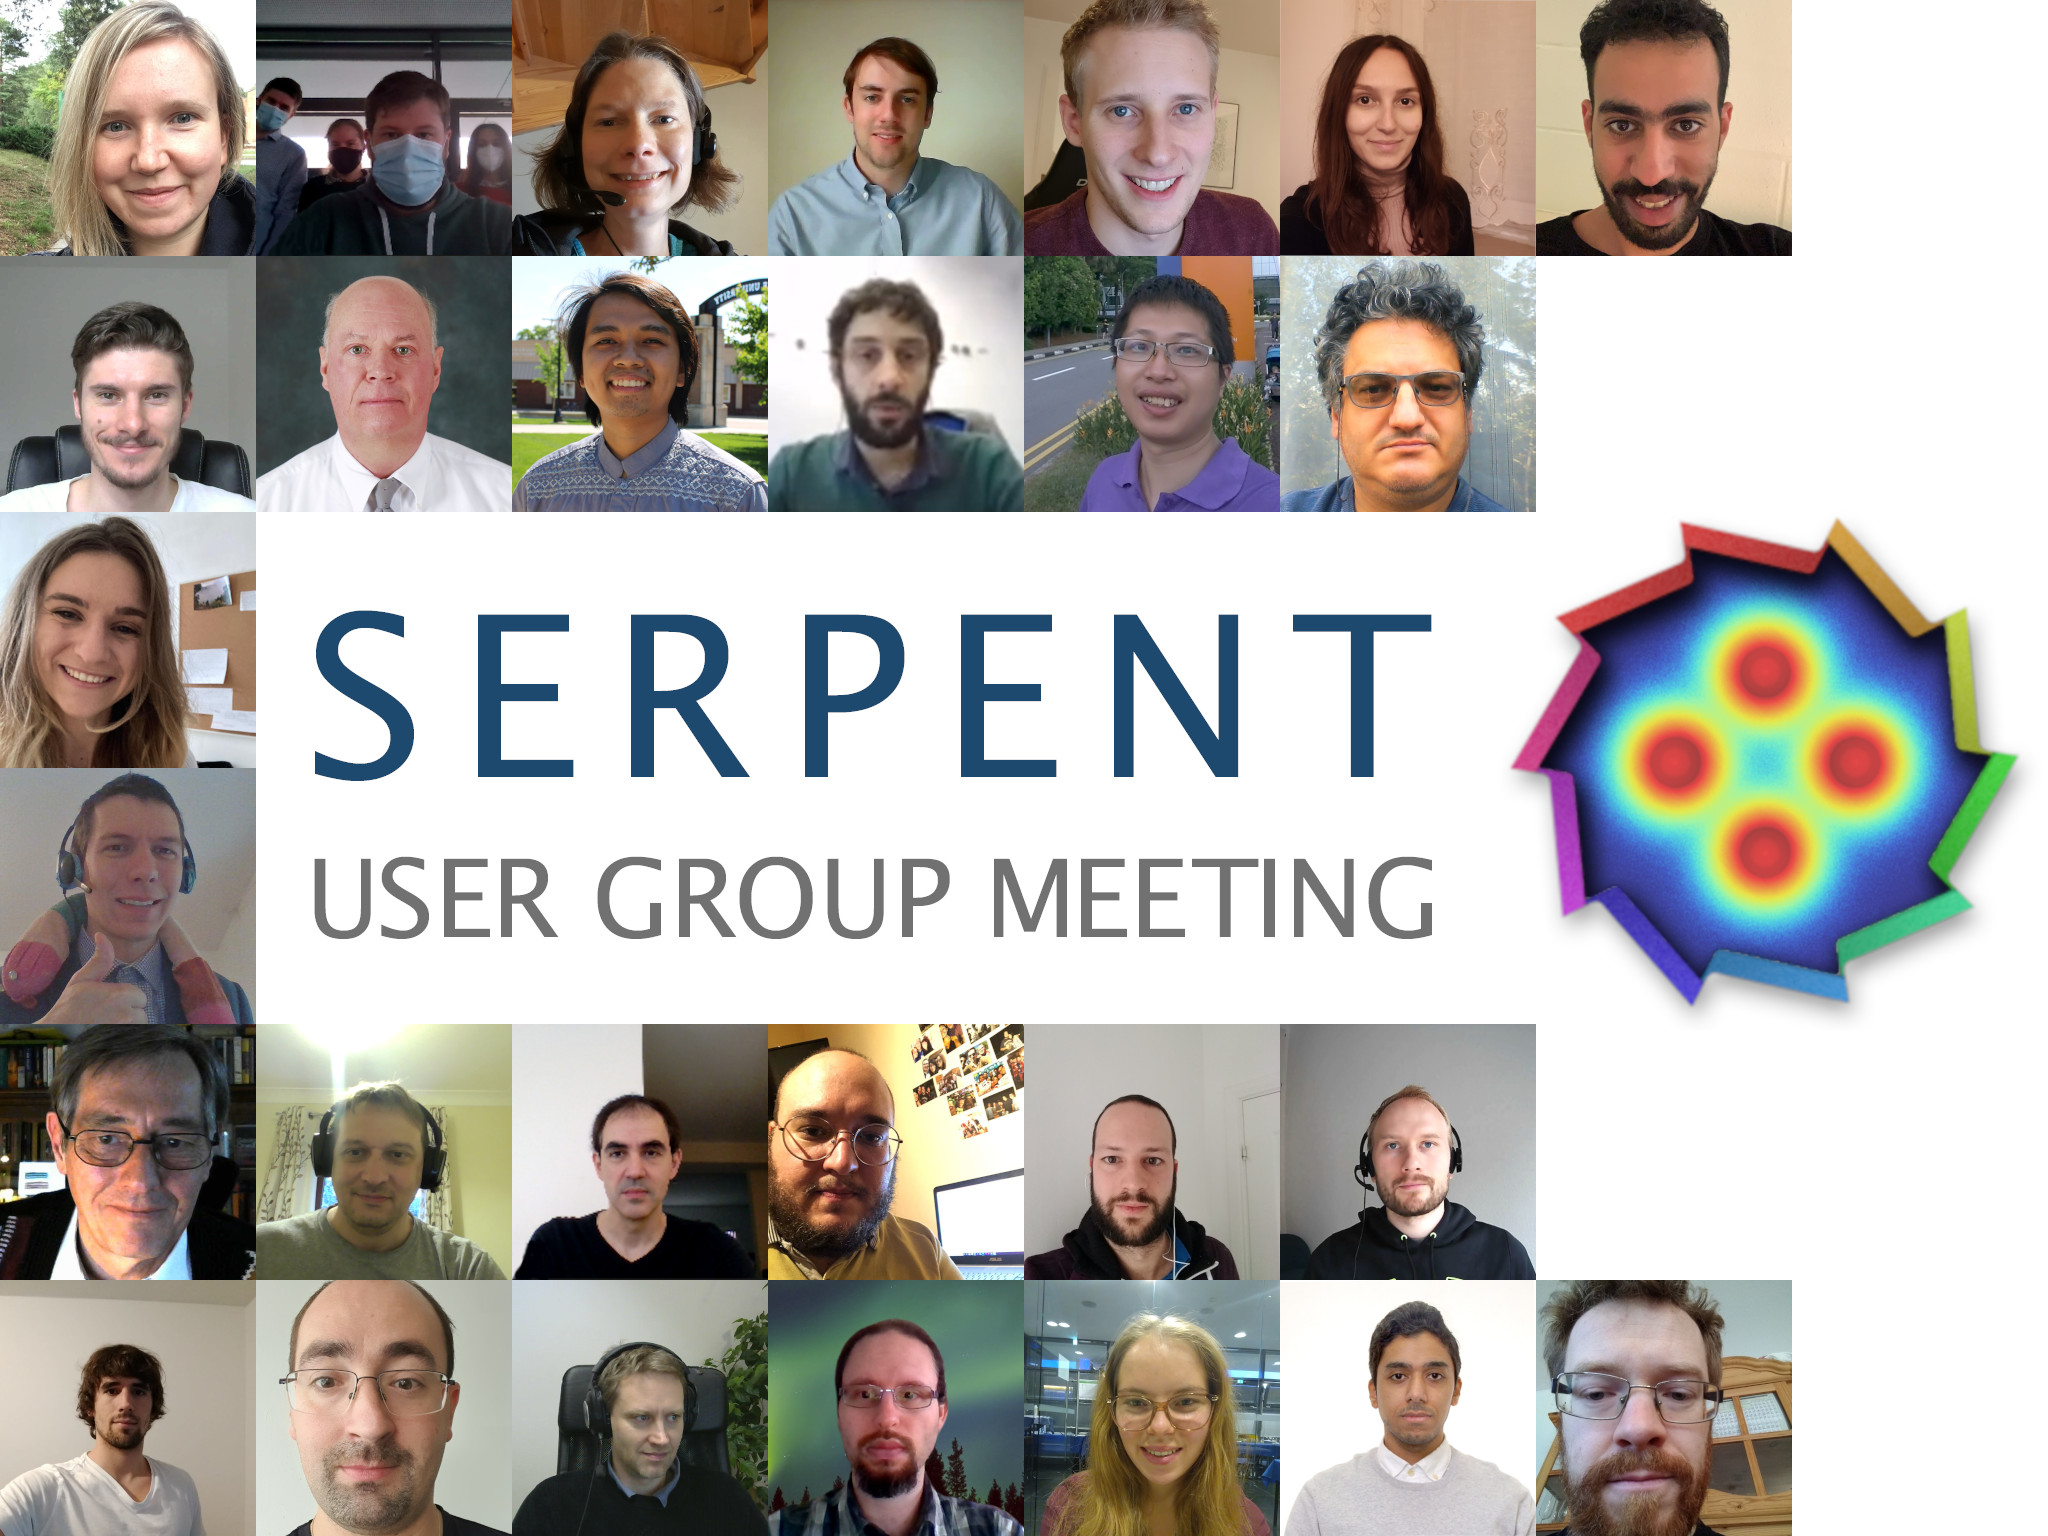 174 participants at the Serpent User Group Meeting